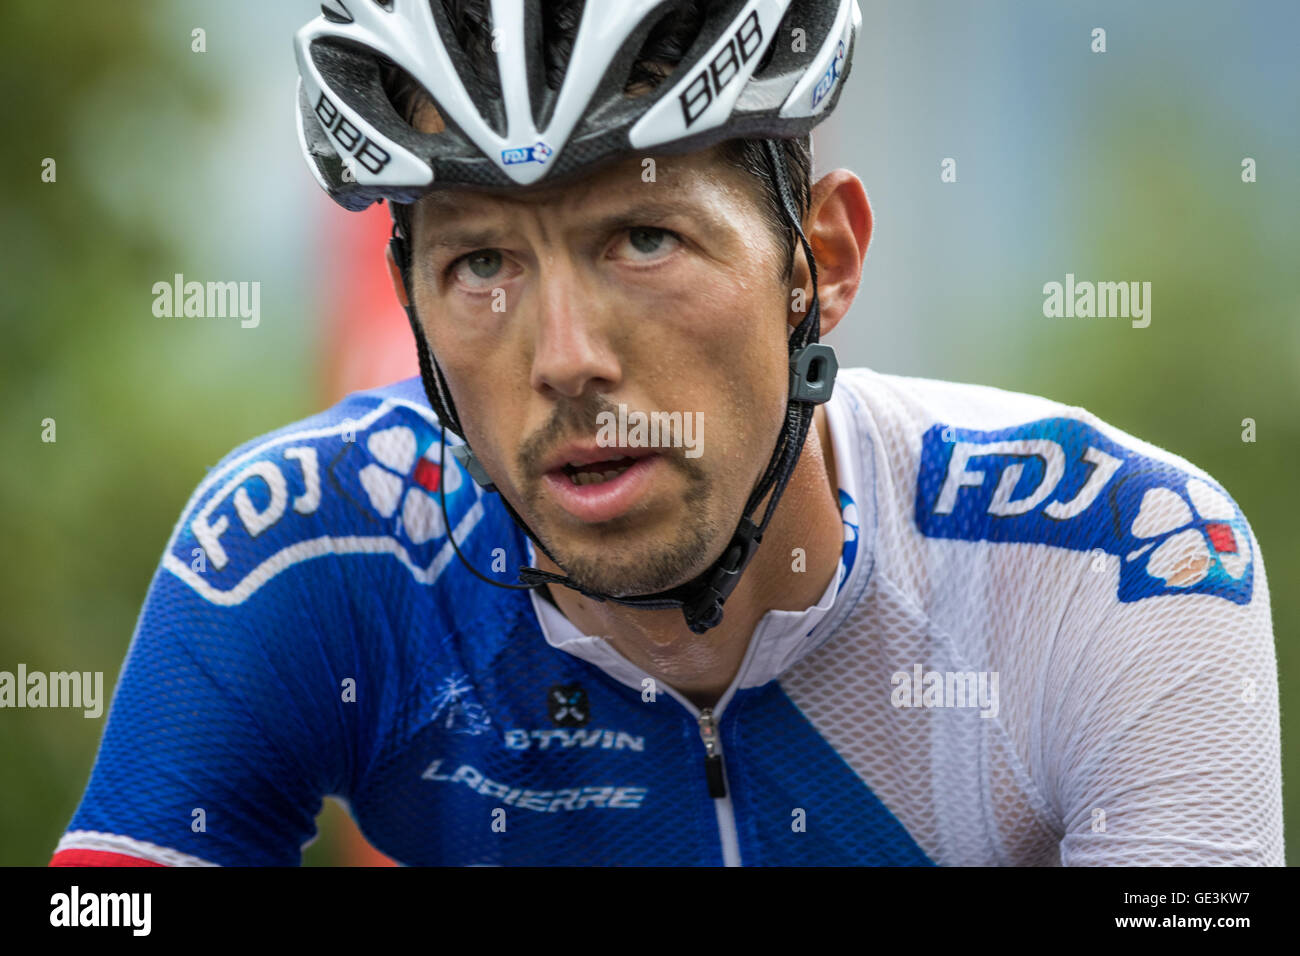 Tour de France. 22nd July, 2016. Saint-Gervais-les-Bains, FR. Steve Morabito (FDJ) looks up the last few hundred meters to the finish after climbing for over 9km. John Kavouris/Alamy Live News Stock Photo